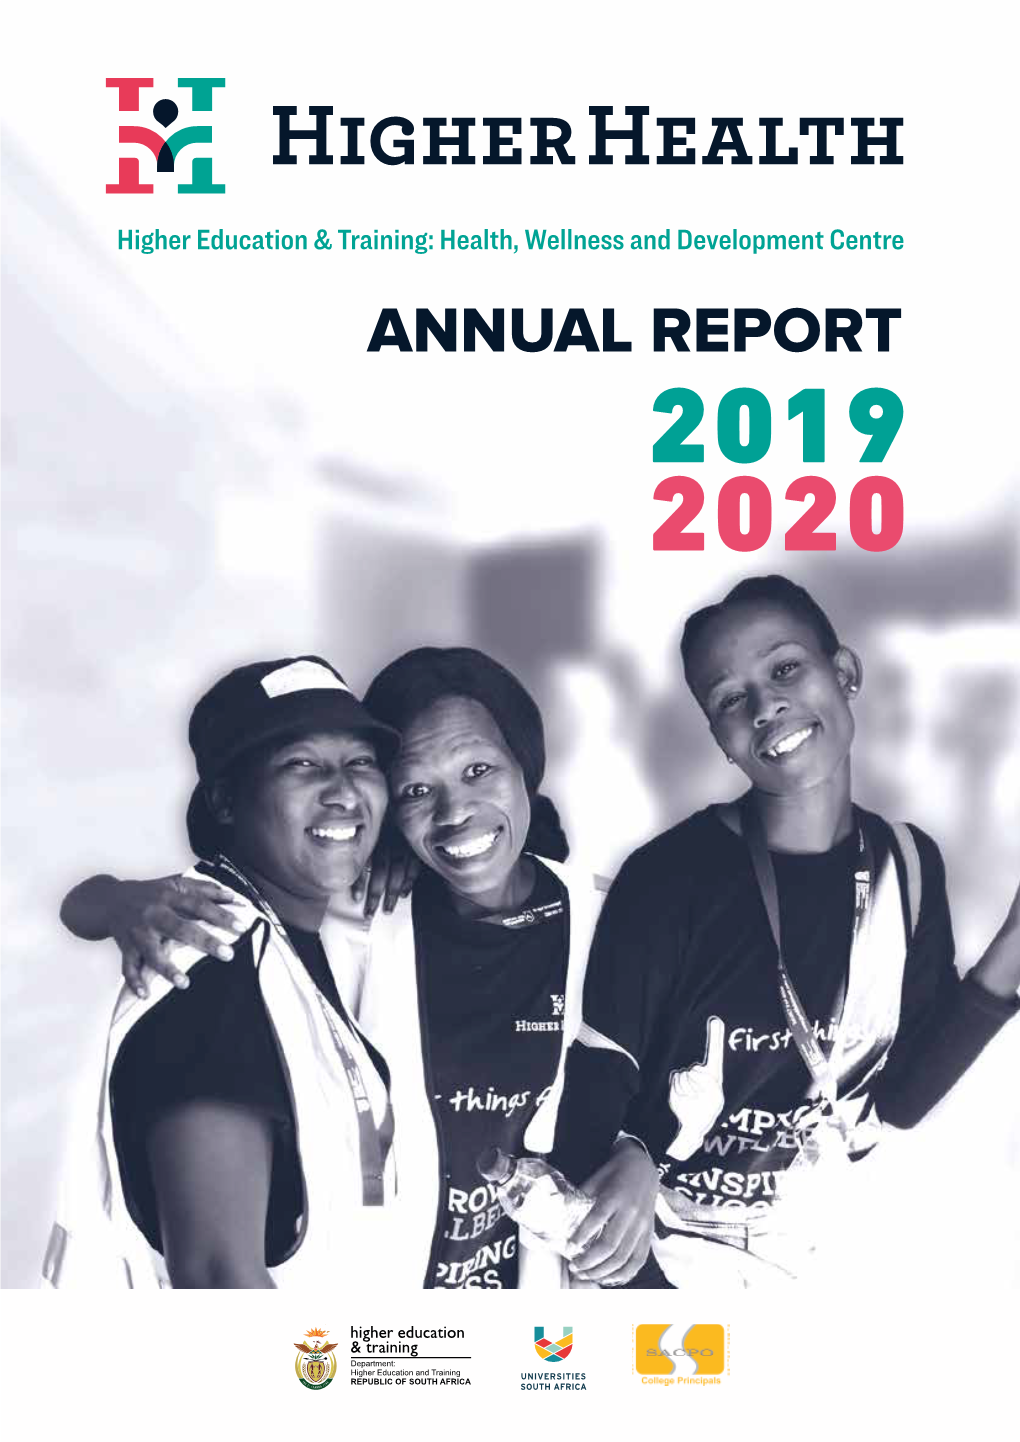 HIGHER HEALTH Annual Report 2019/2020